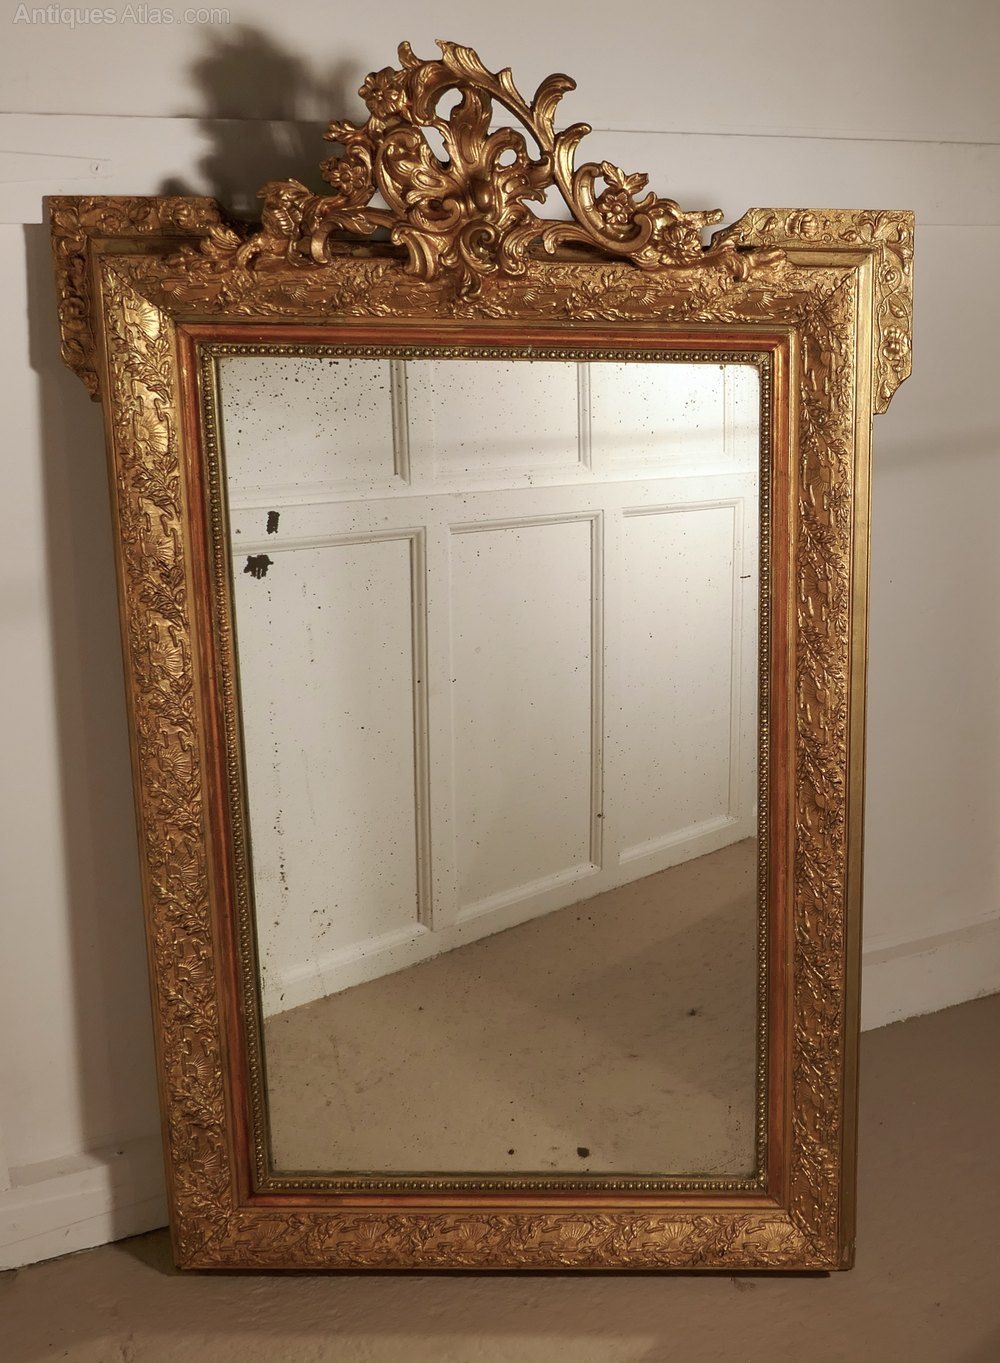 Antiques Atlas – Large French Gilt Wall Mirror Within Antique Gold Leaf Round Oversized Wall Mirrors (View 10 of 15)